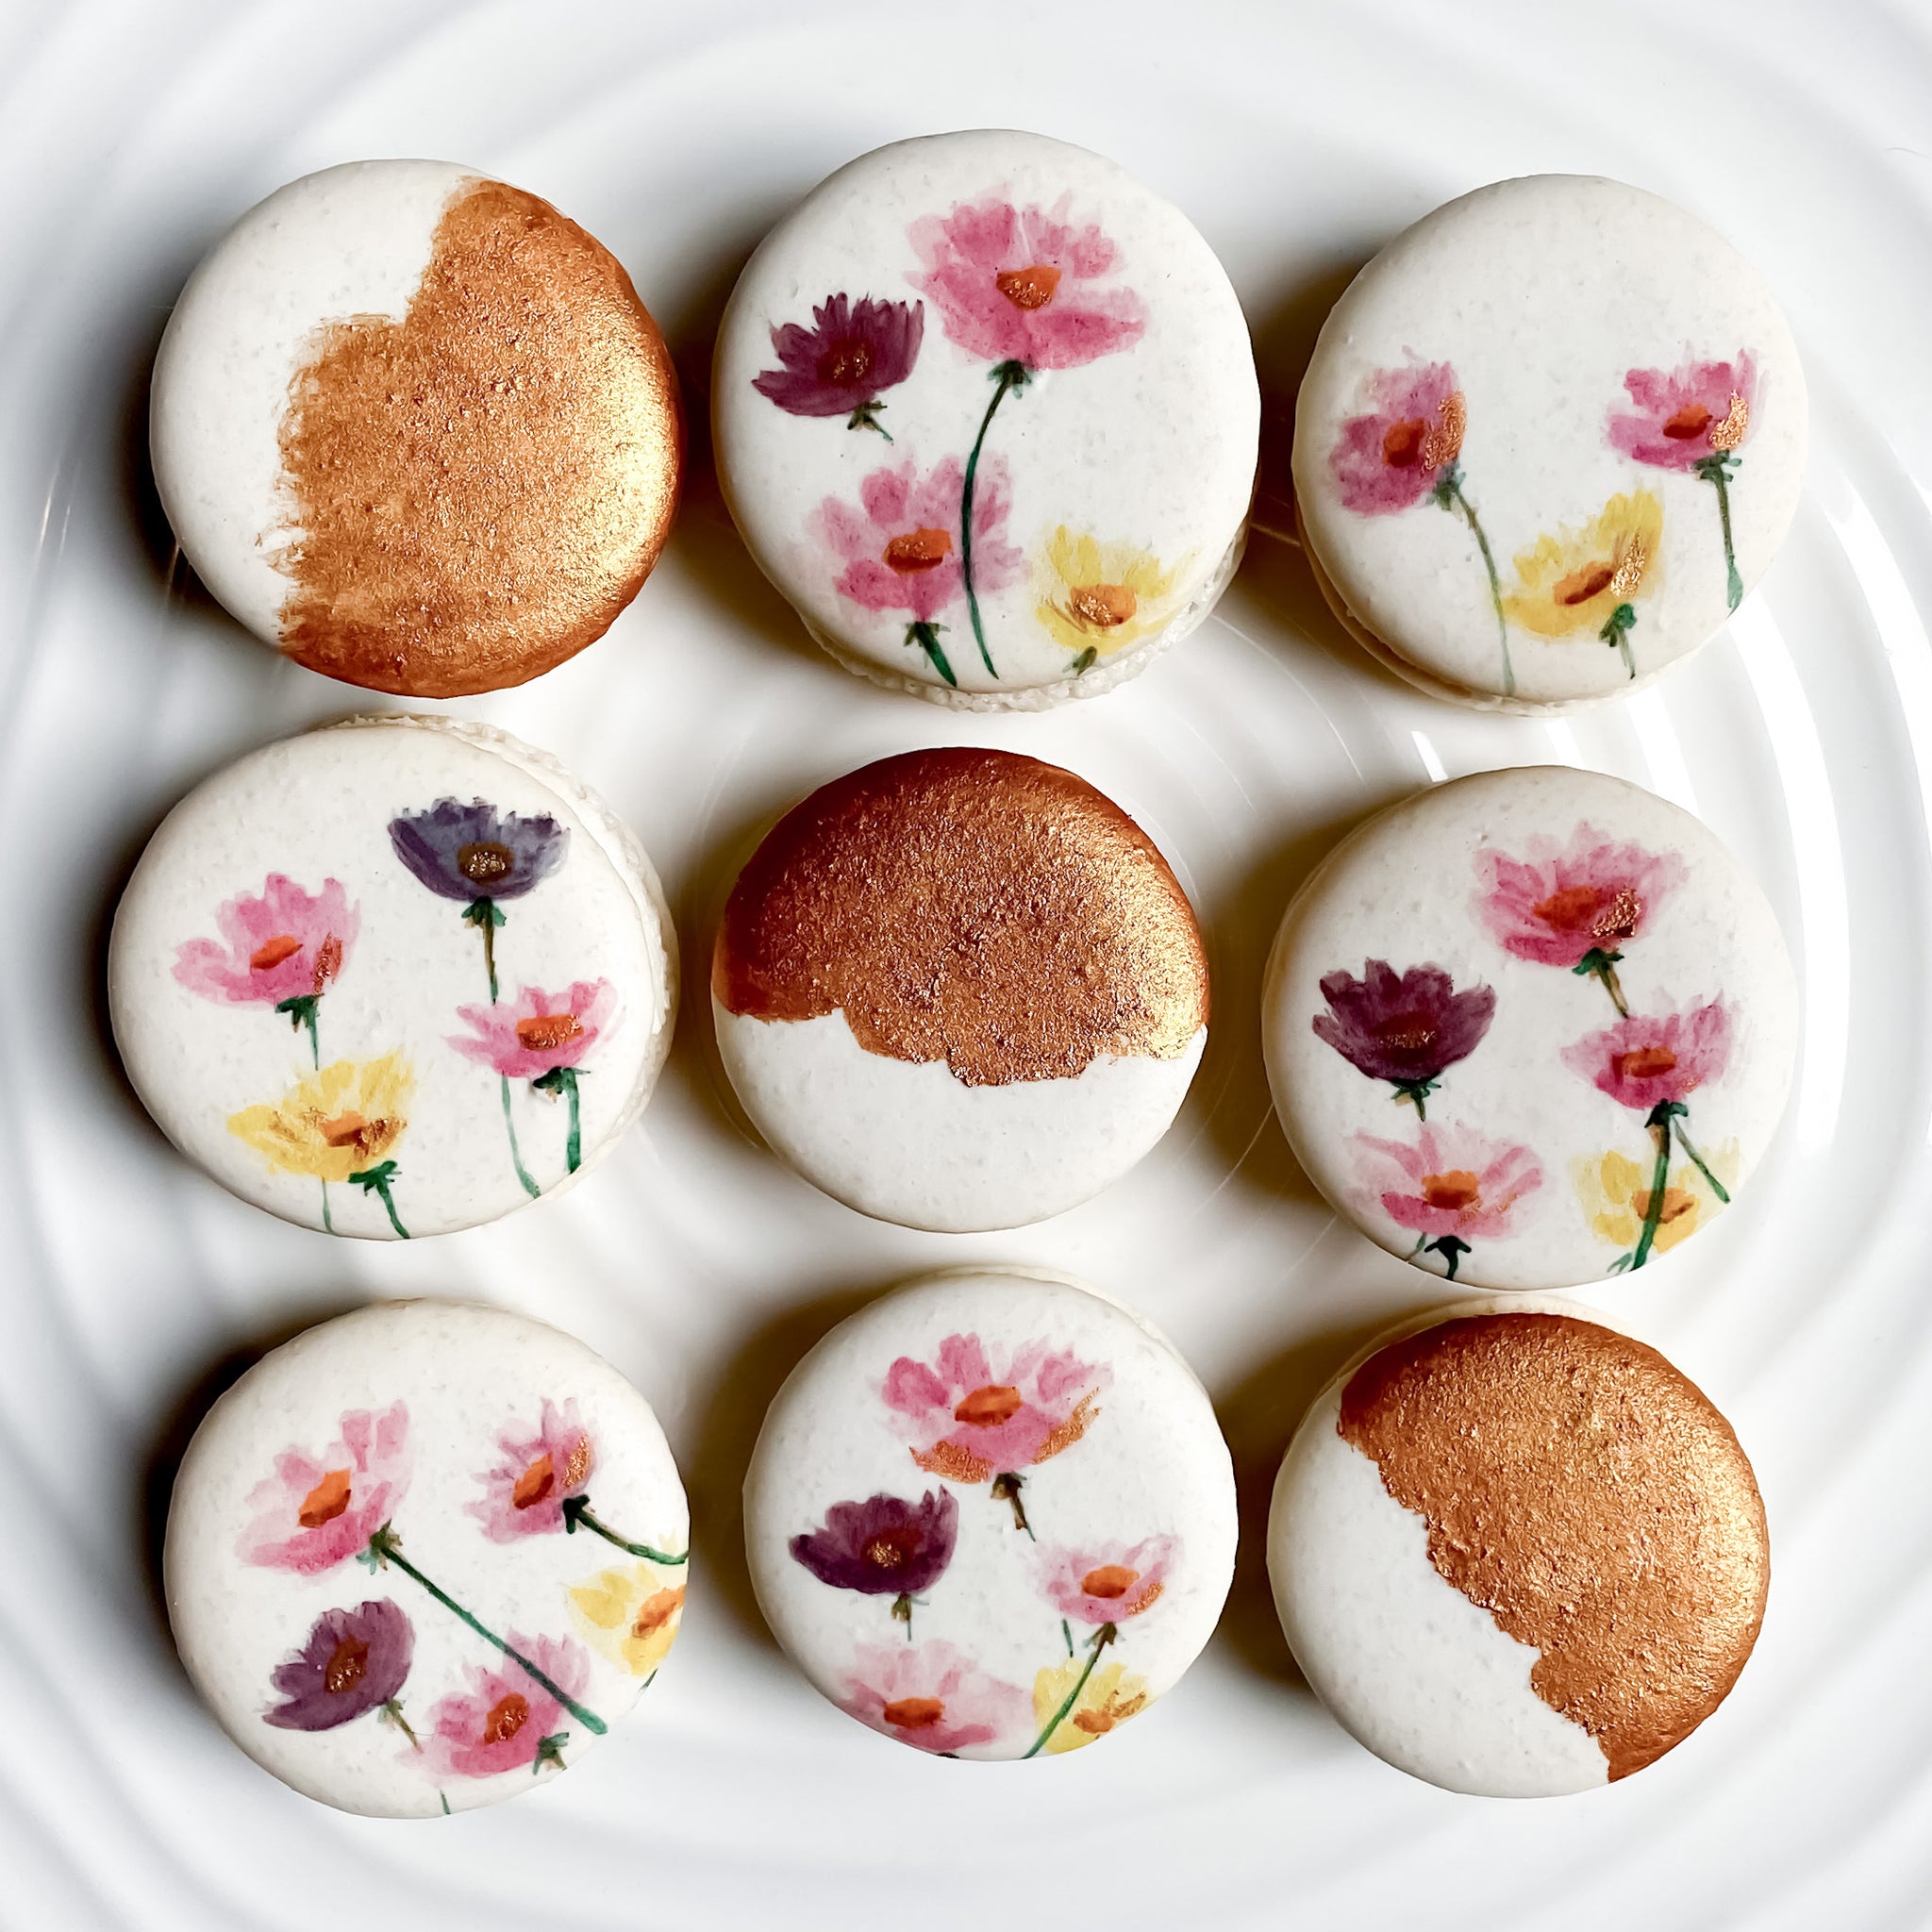 Cosmos flower painted macarons